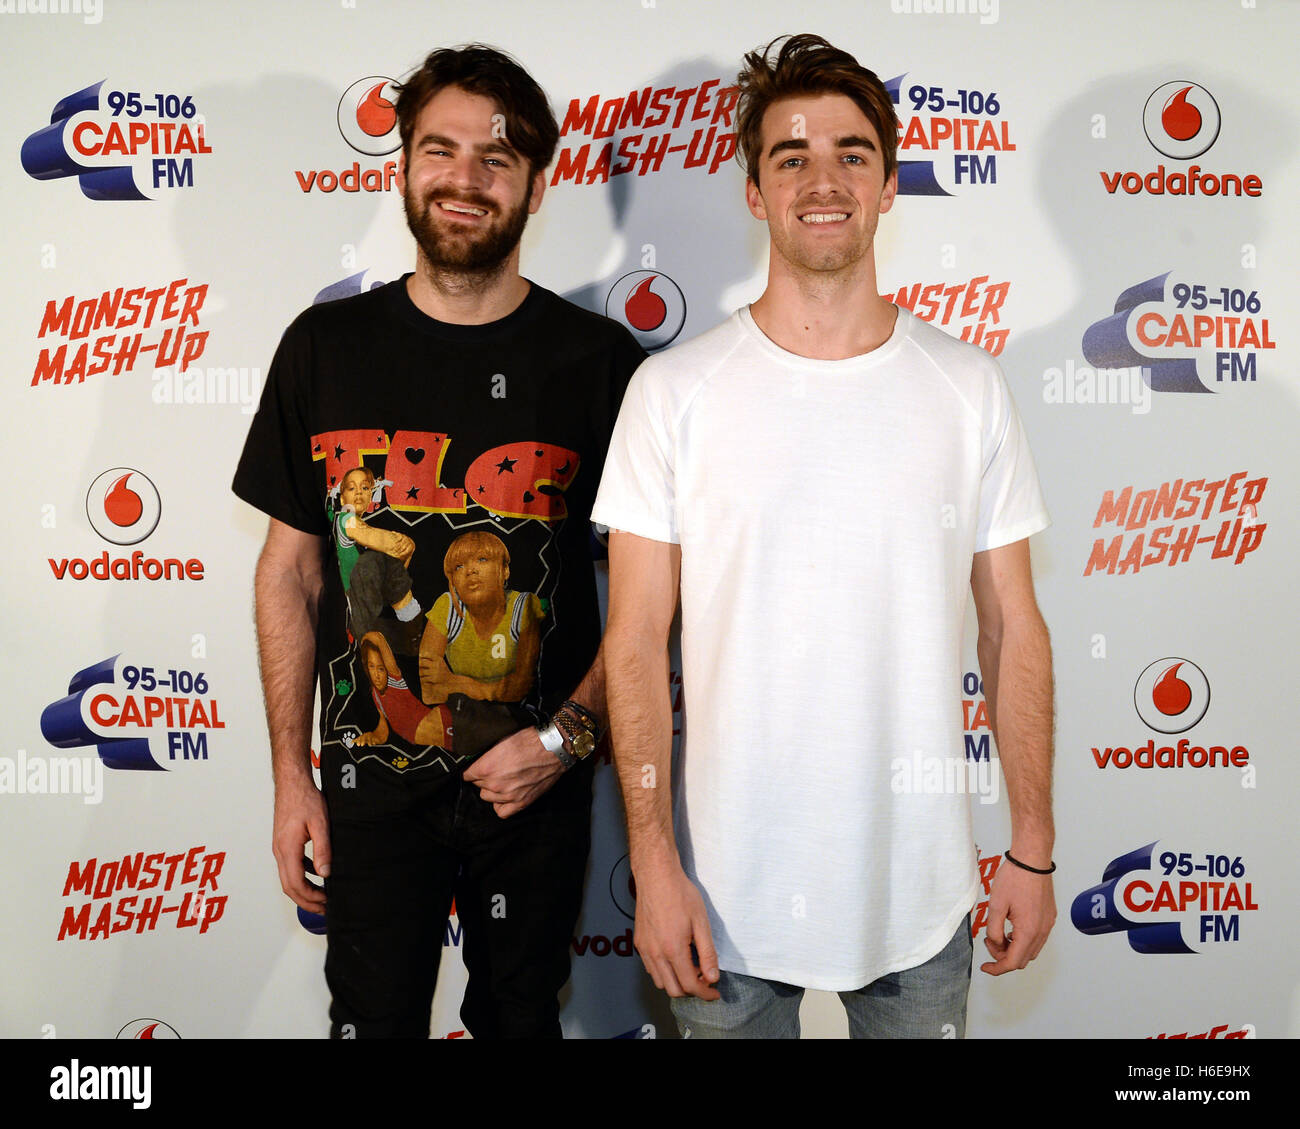 The Chainsmokers during Capital FM's Monster Mash Up with Vodafone at Mountford Hall, Liverpool Guild of Students, Liverpool. PRESS ASSOCIATION Photo. Picture date: Thursday 27 October 2016. Photo credit should read: Anna Gowthorpe/PA Wire Capital's Monster Mash-Up with Vodafone got underway in Liverpool tonight (Thursday 27th October). It was the first of three Halloween gigs bringing Capital listeners closer to some of the world's hottest artists, DJs and producers. The Chainsmokers, Martin Solveig, Sigma, Kungs and Anton Powers played to a sold-out crowd at Liverpool's Mountford Hall, with Stock Photo